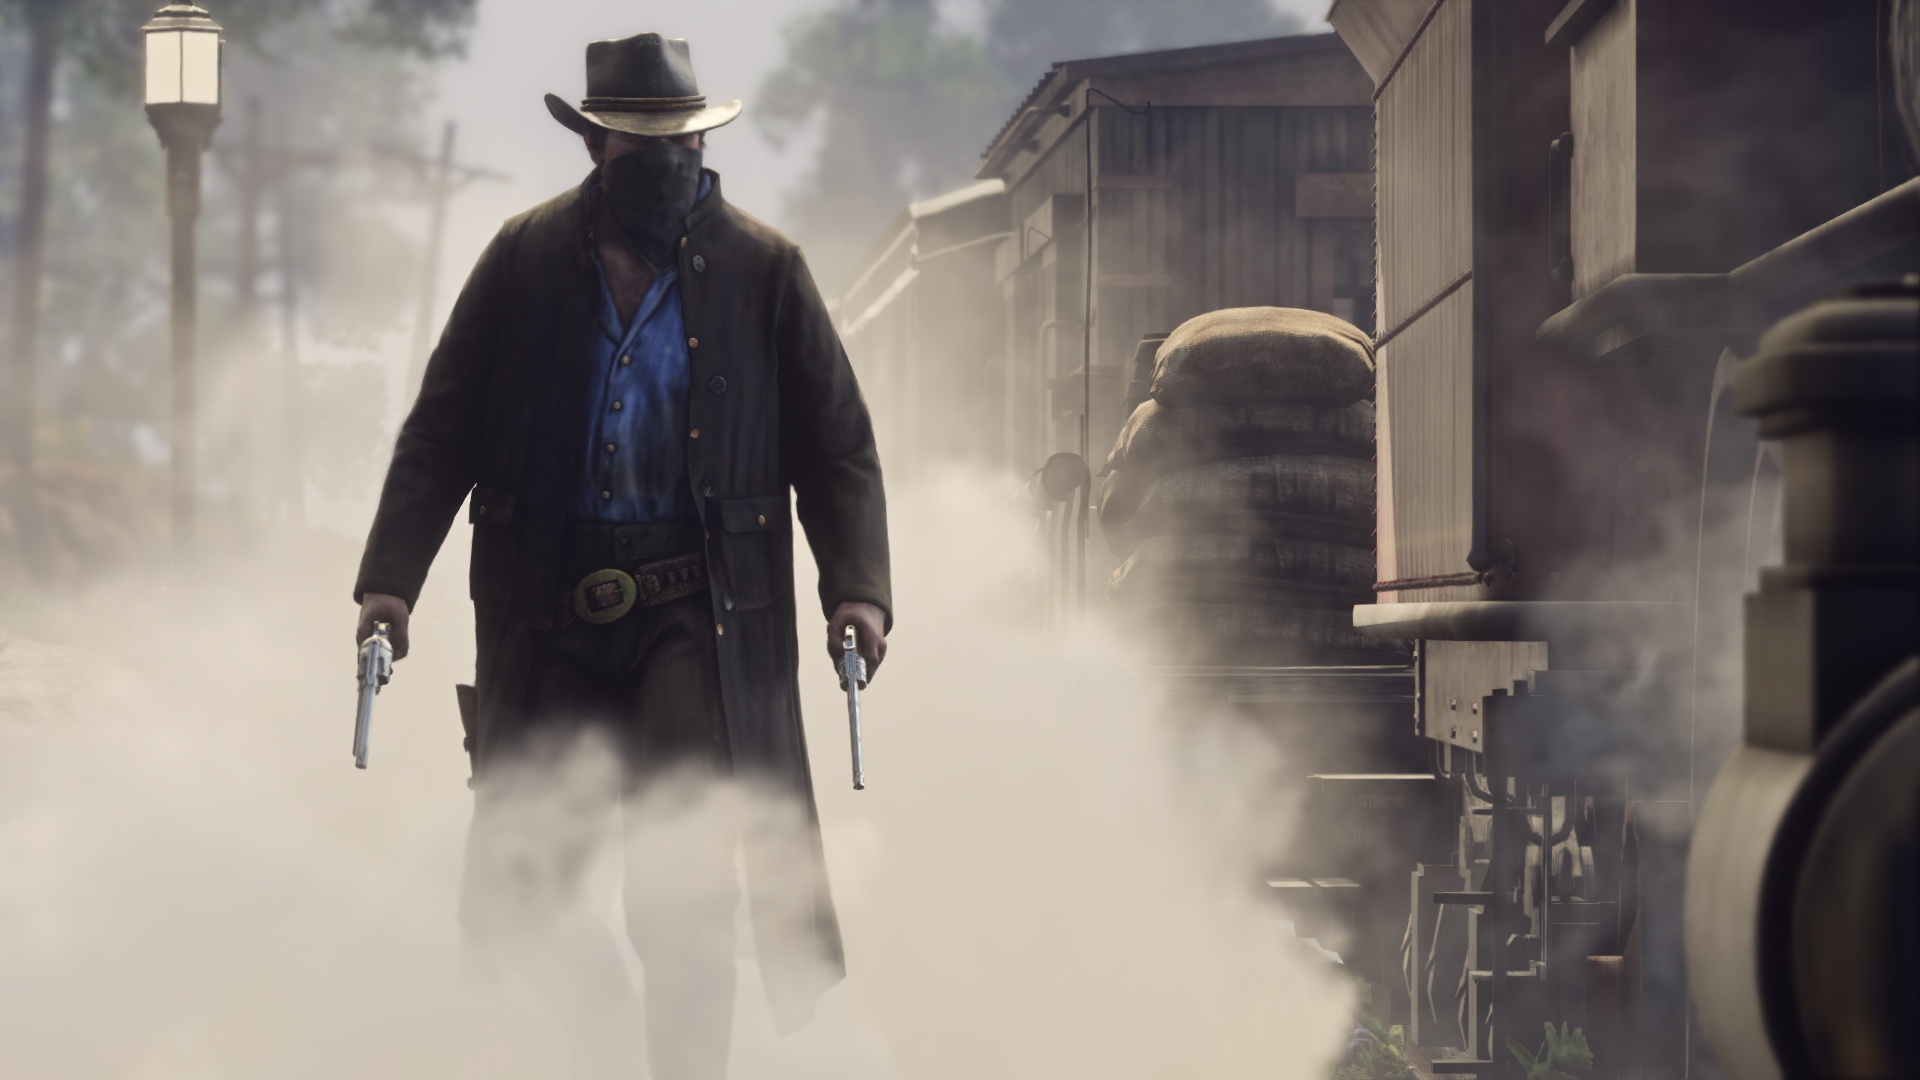 330+ Red Dead Redemption 2 HD Wallpapers and Backgrounds